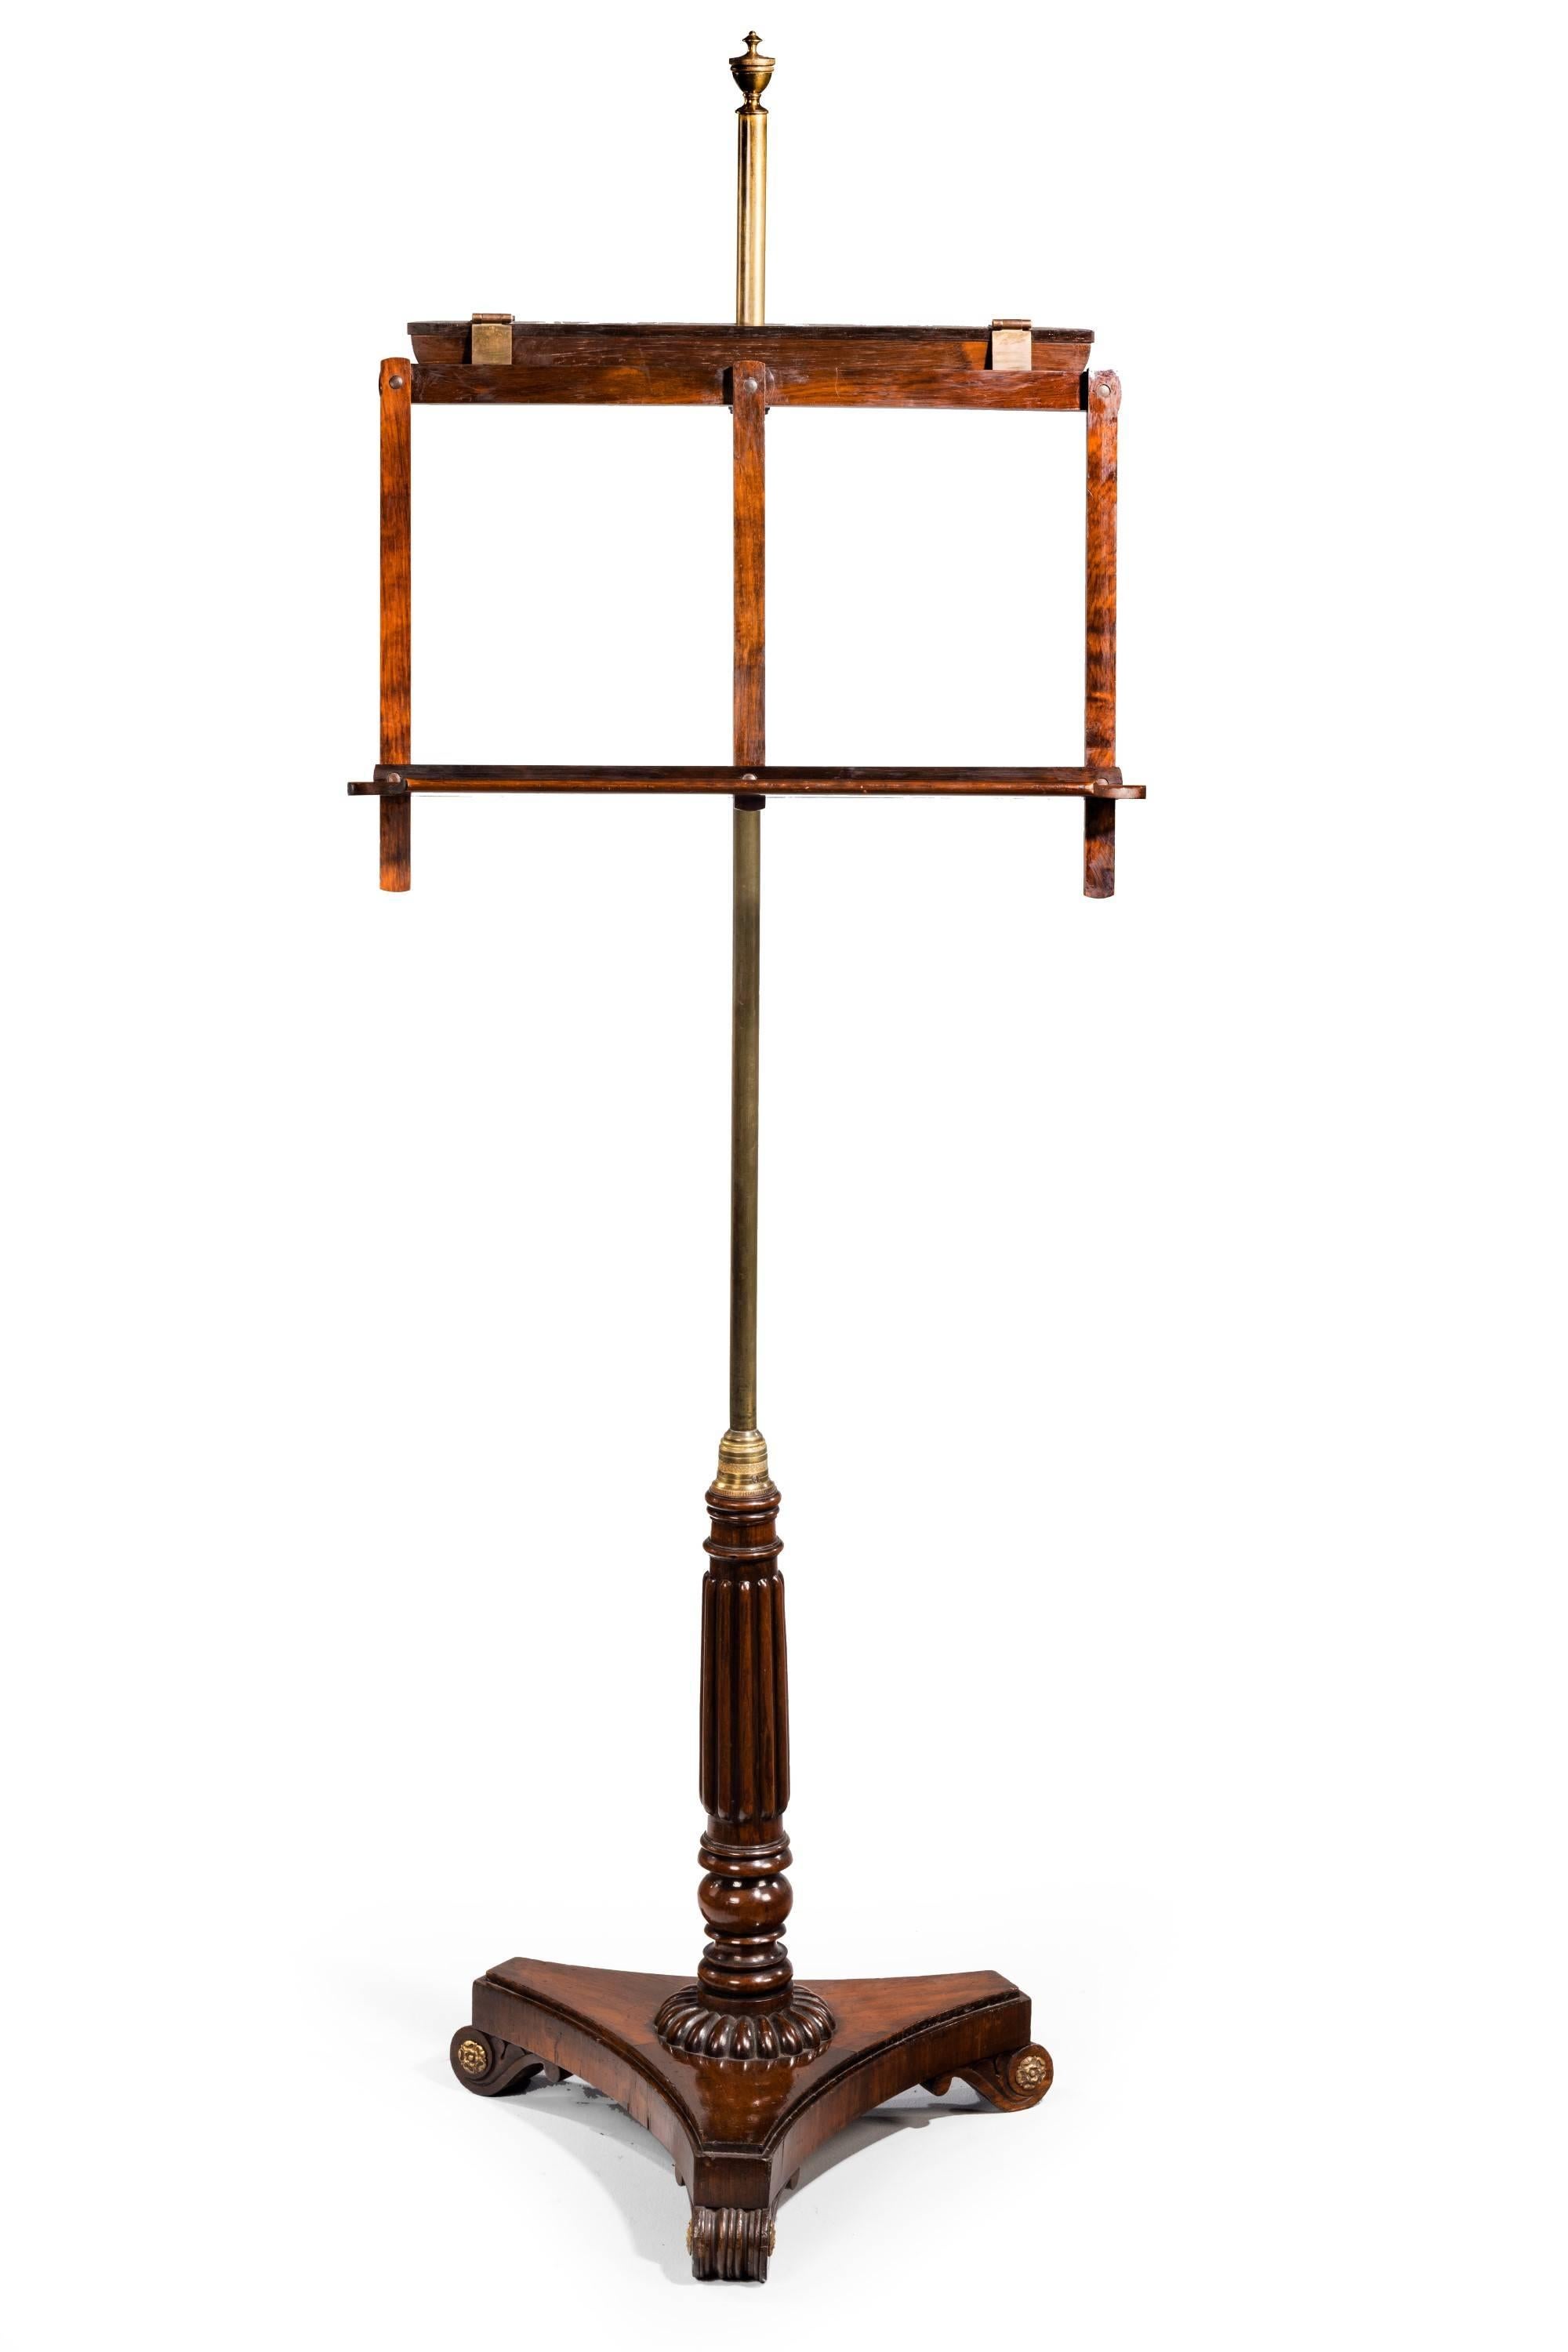 Typical of Gillows of Lancaster an elegant Regency period music stand. Fine slender support. Adjustable top section over a three-part base. Excellent overall condition.